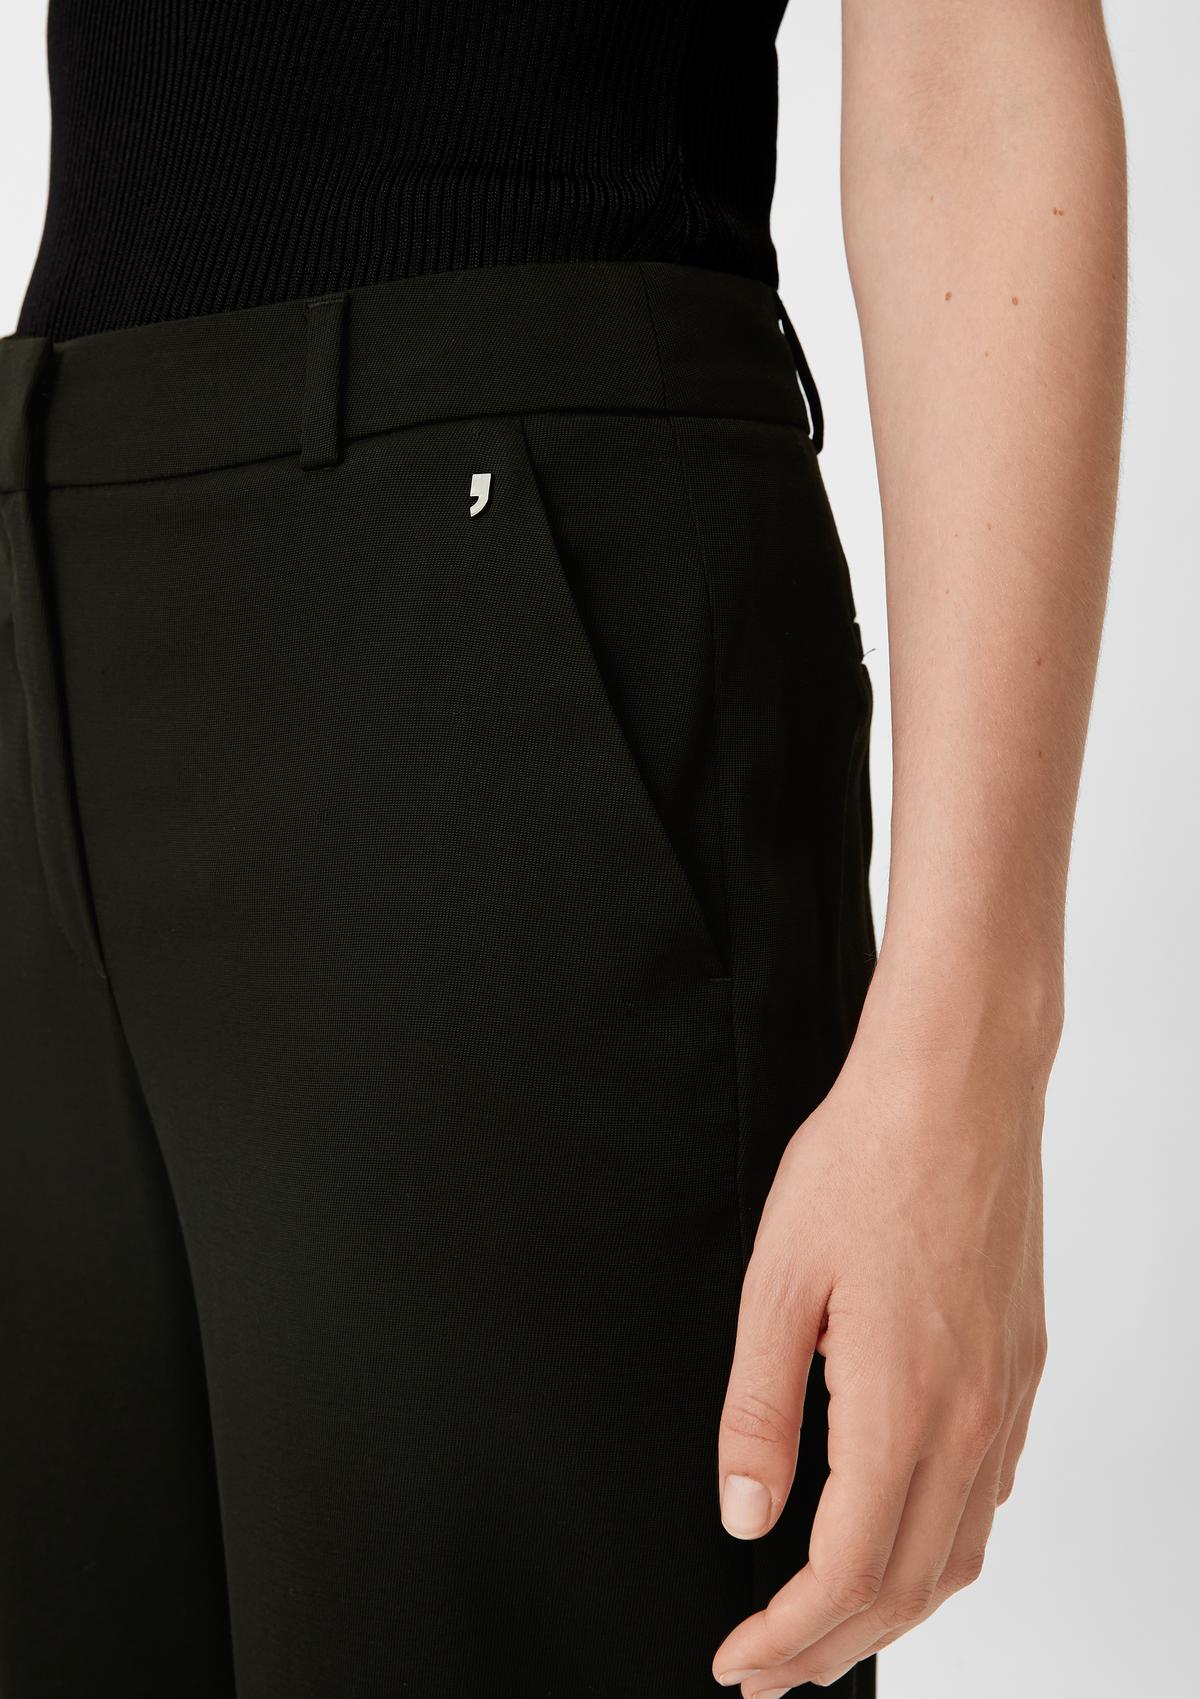 comma Regular fit: Cloth trousers made of twill